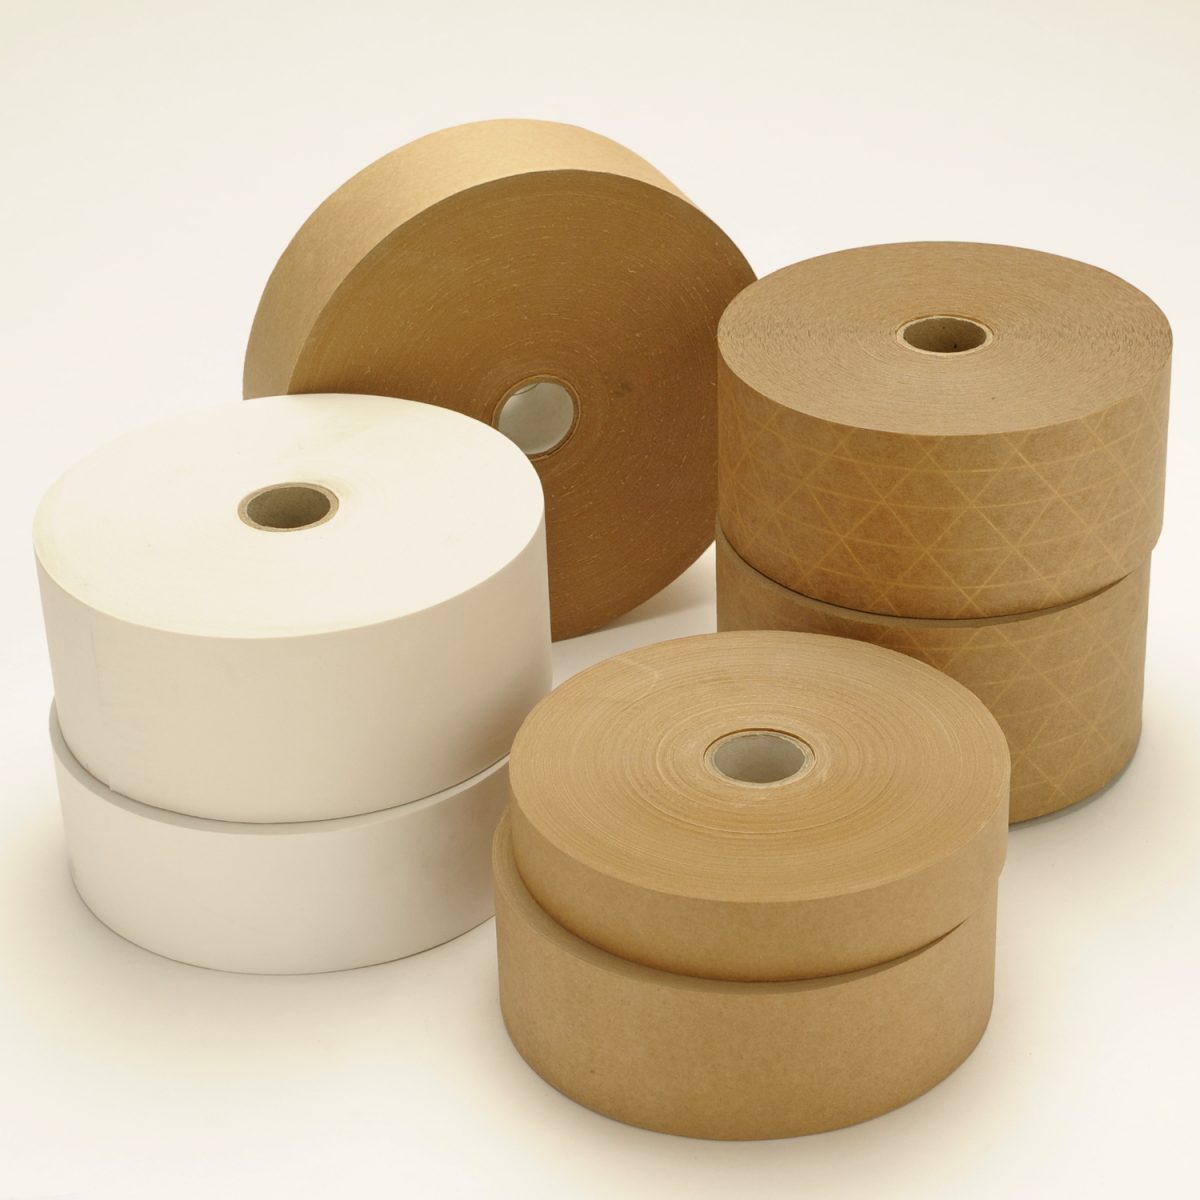 What is the Most Eco-friendly Packing Tape?